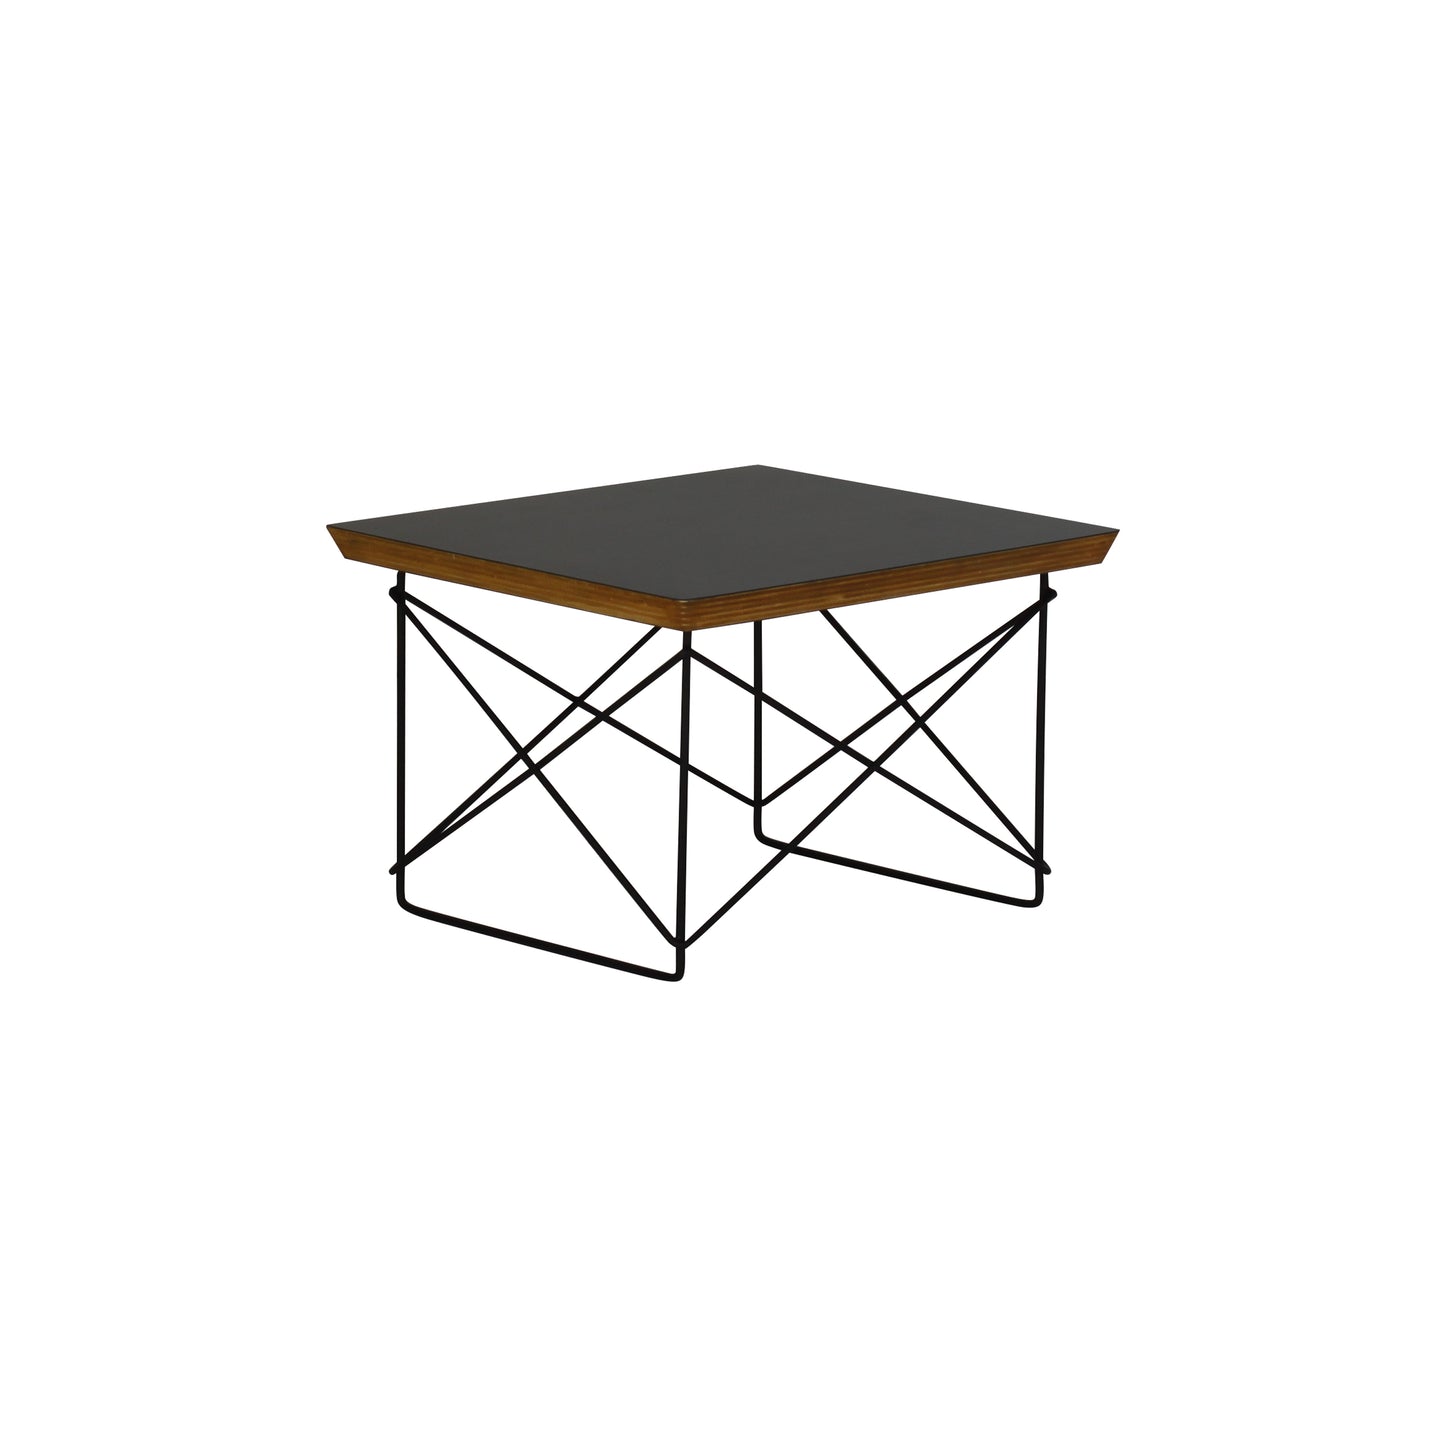 Eames style occasional table